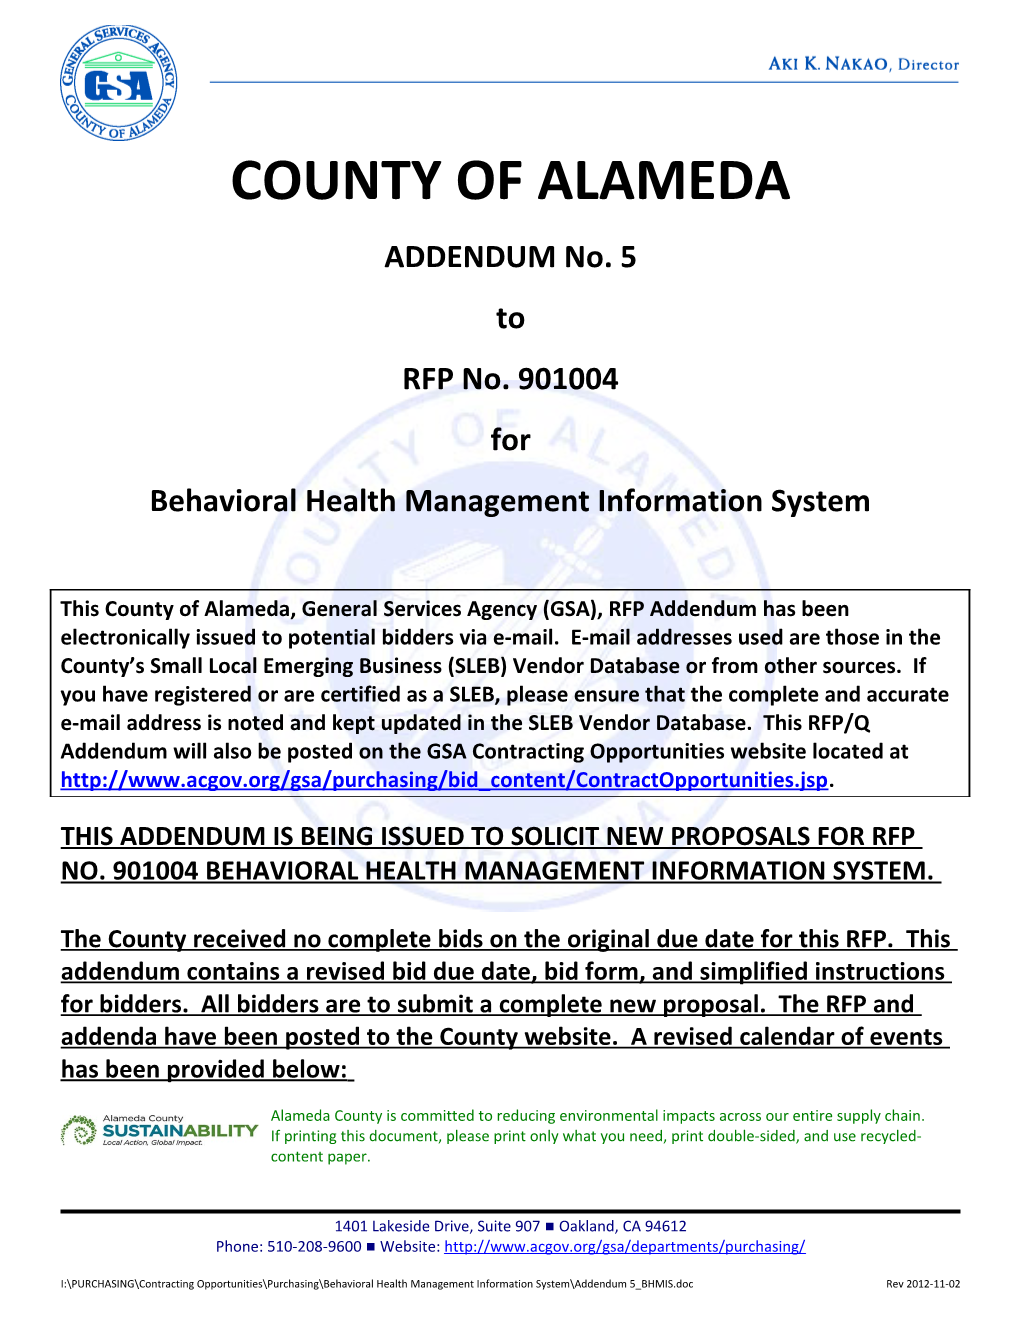 County of Alameda, General Services Agency Purchasing s1